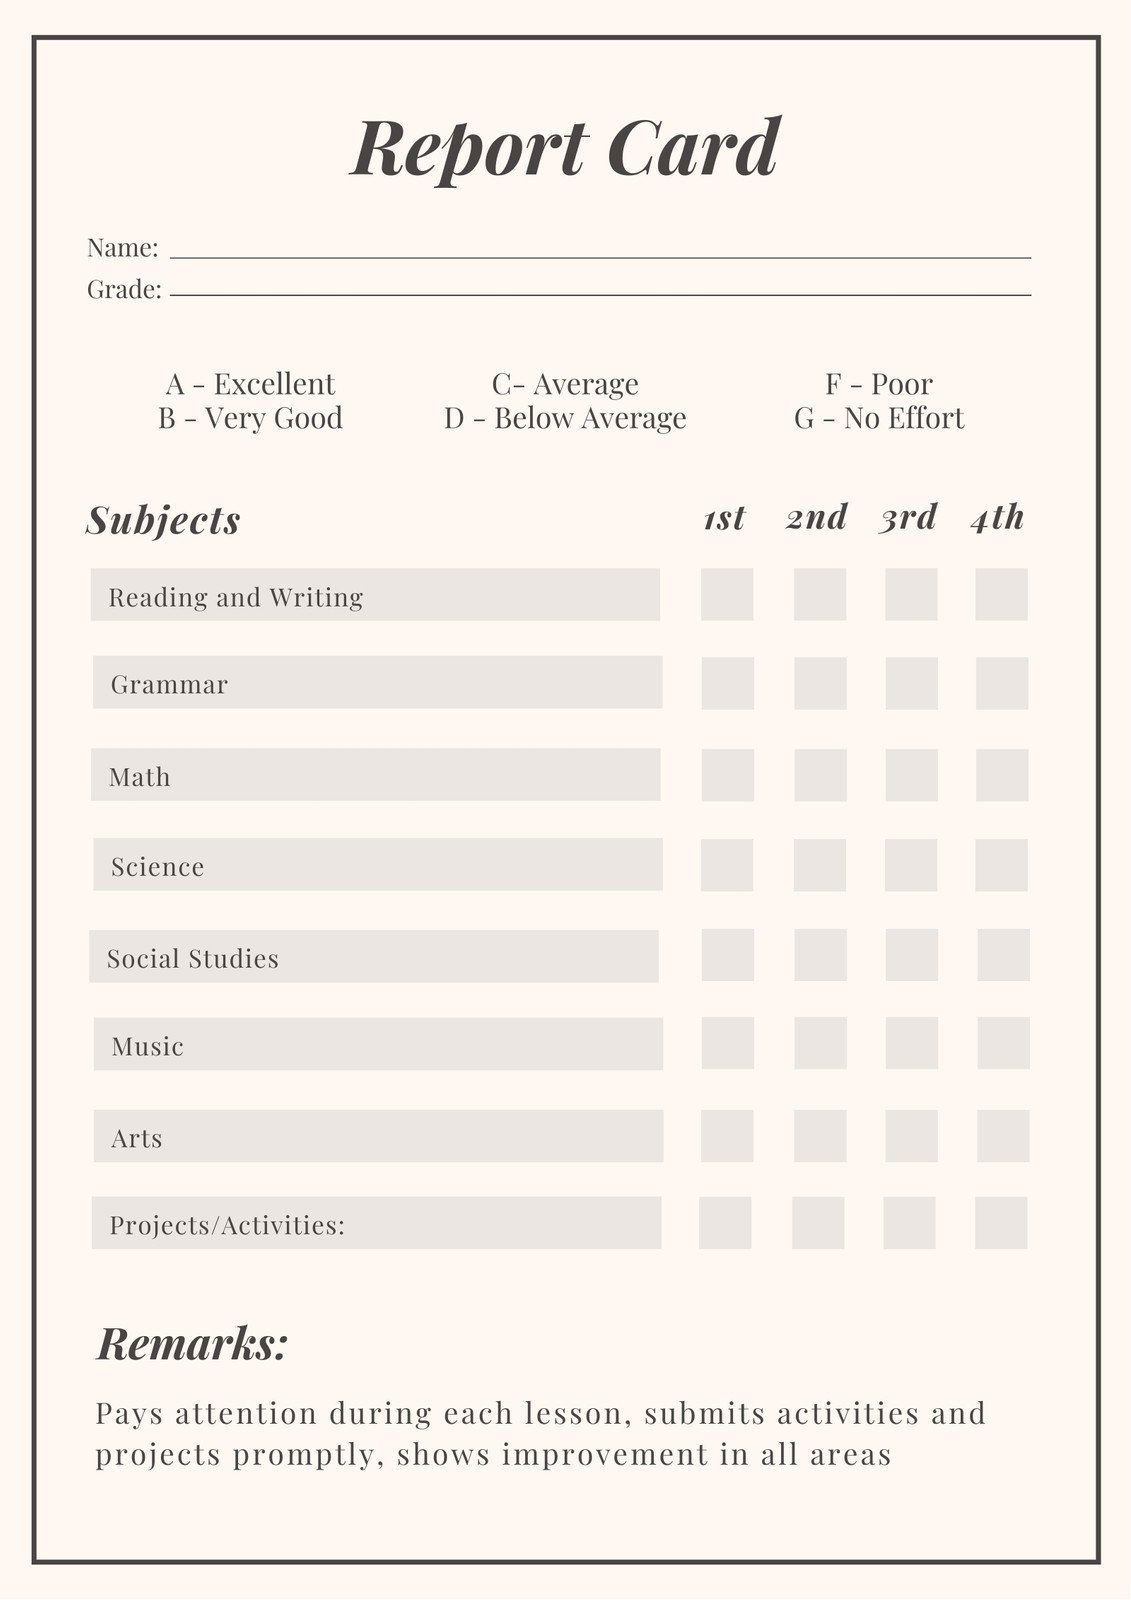 Free, printable, customizable report card templates  Canva Throughout Character Report Card Template